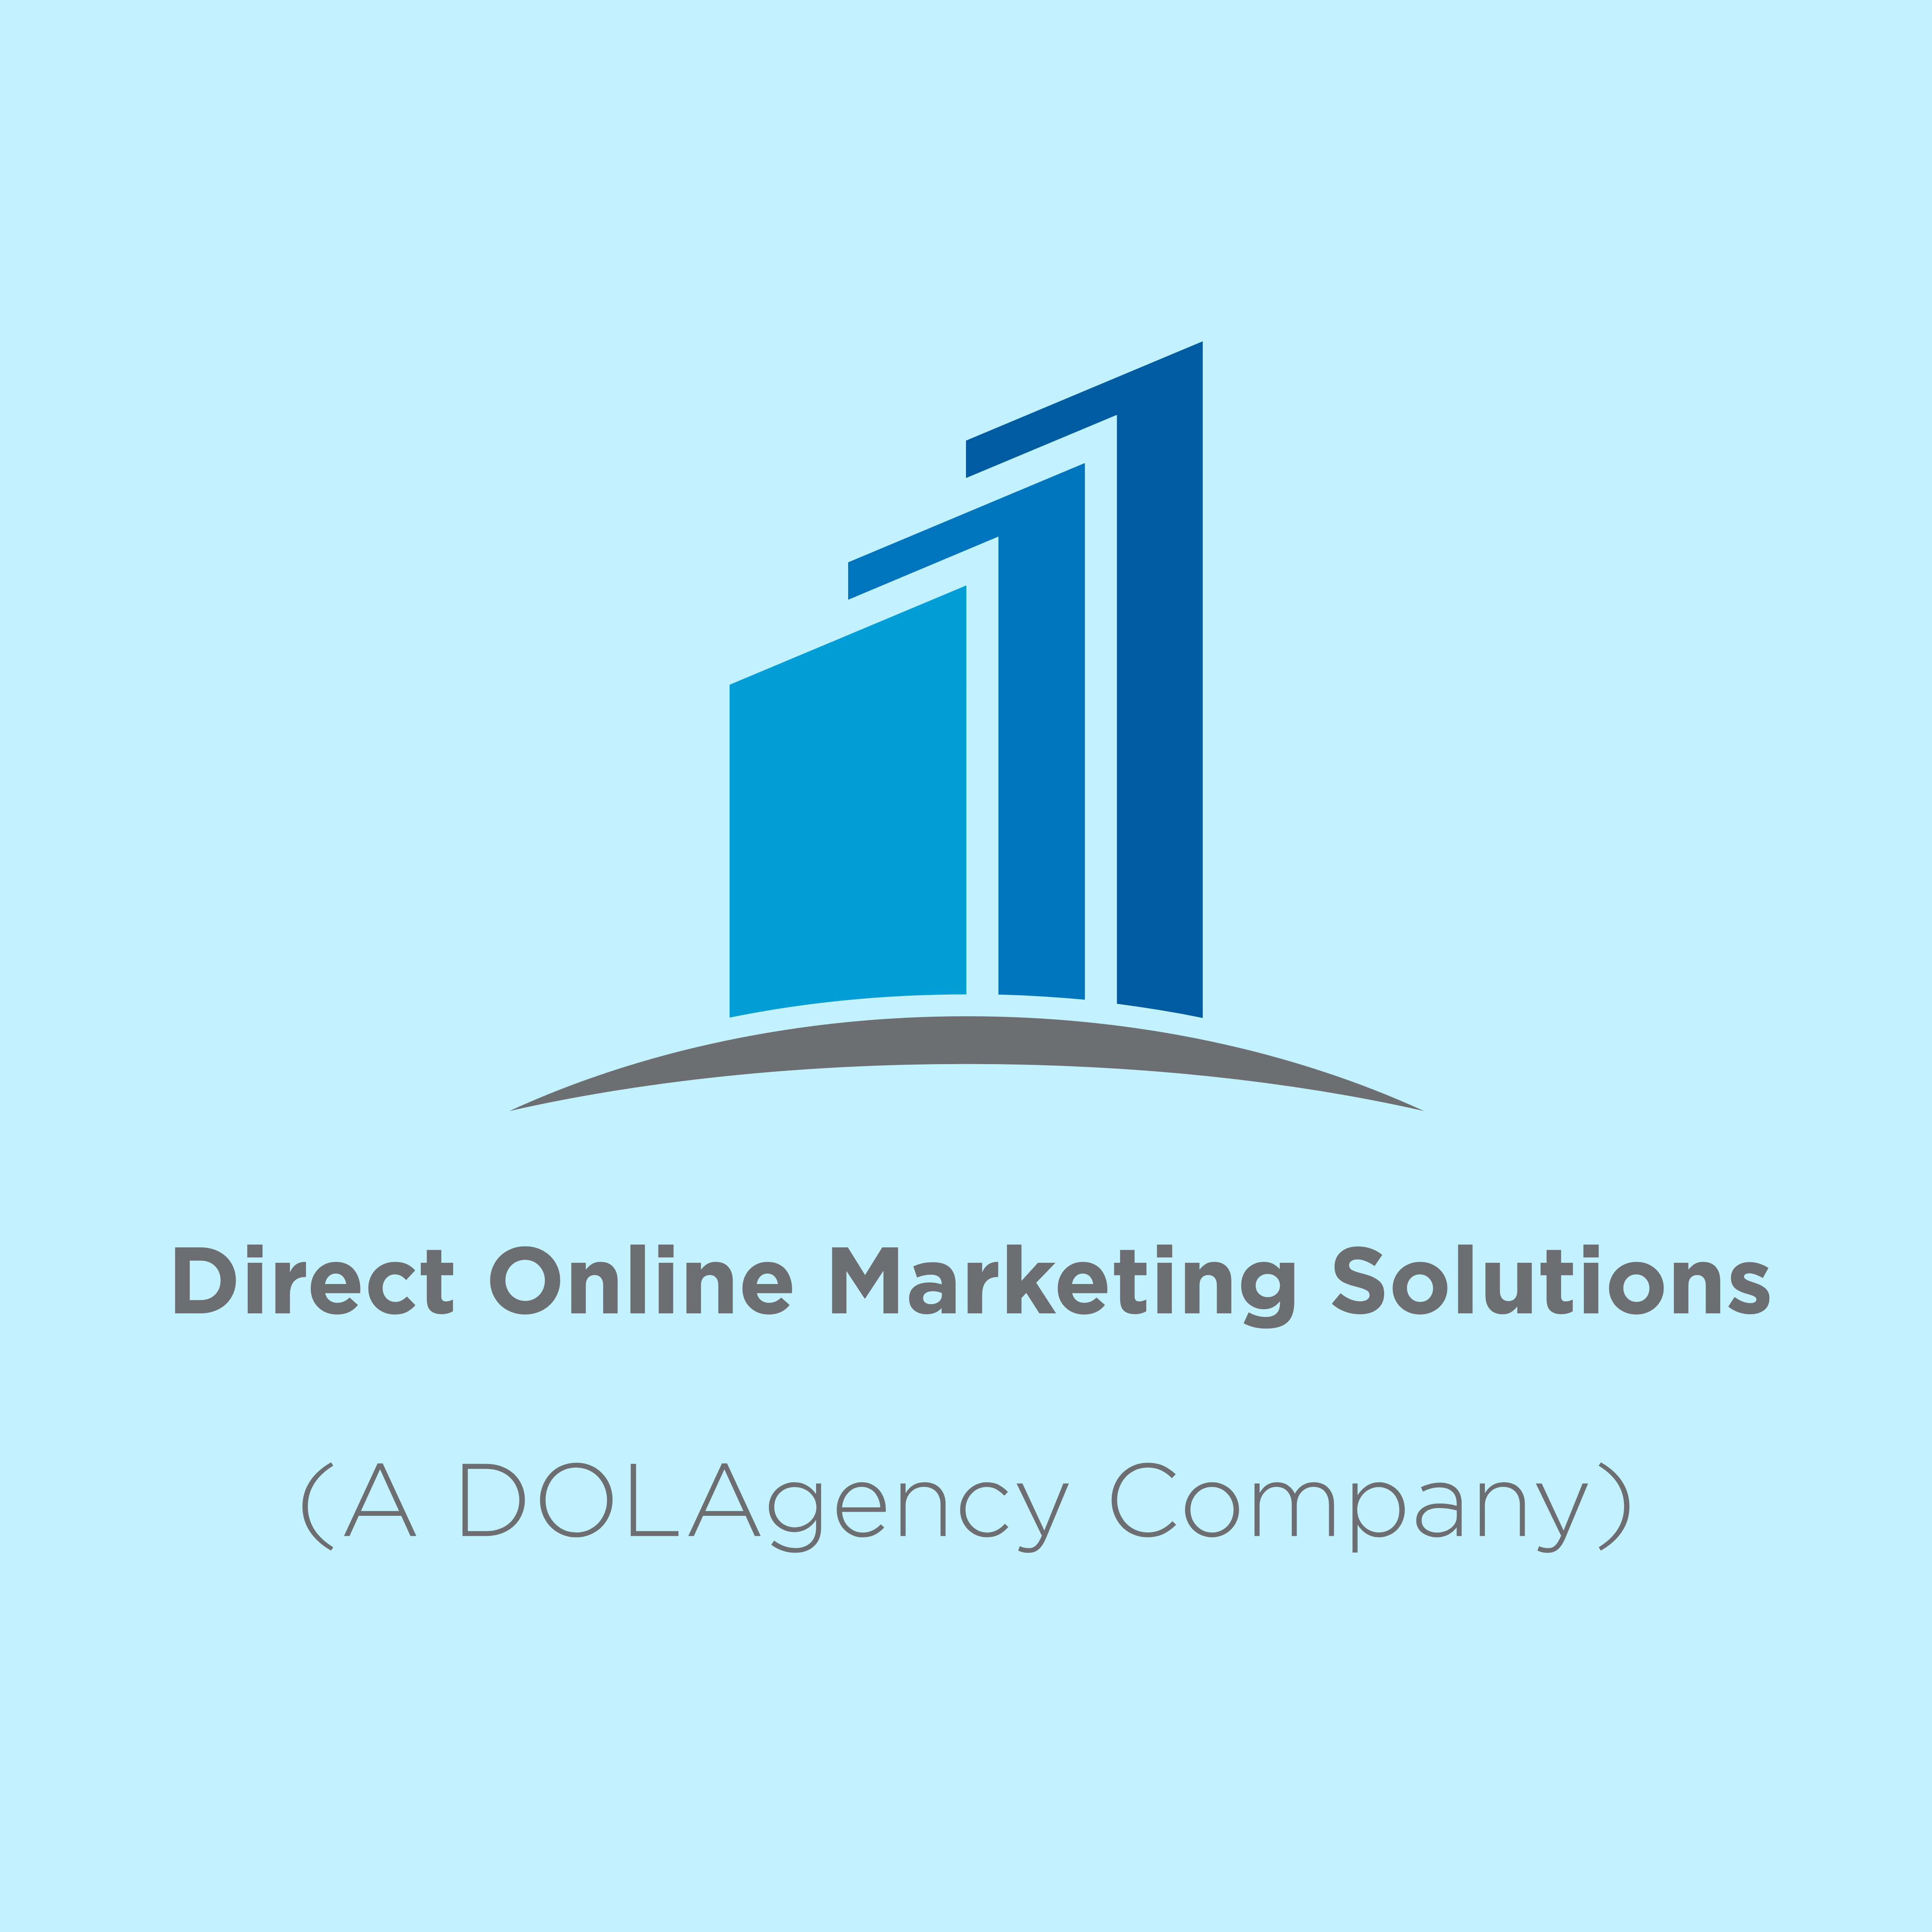 Direct Online Marketing Solutions